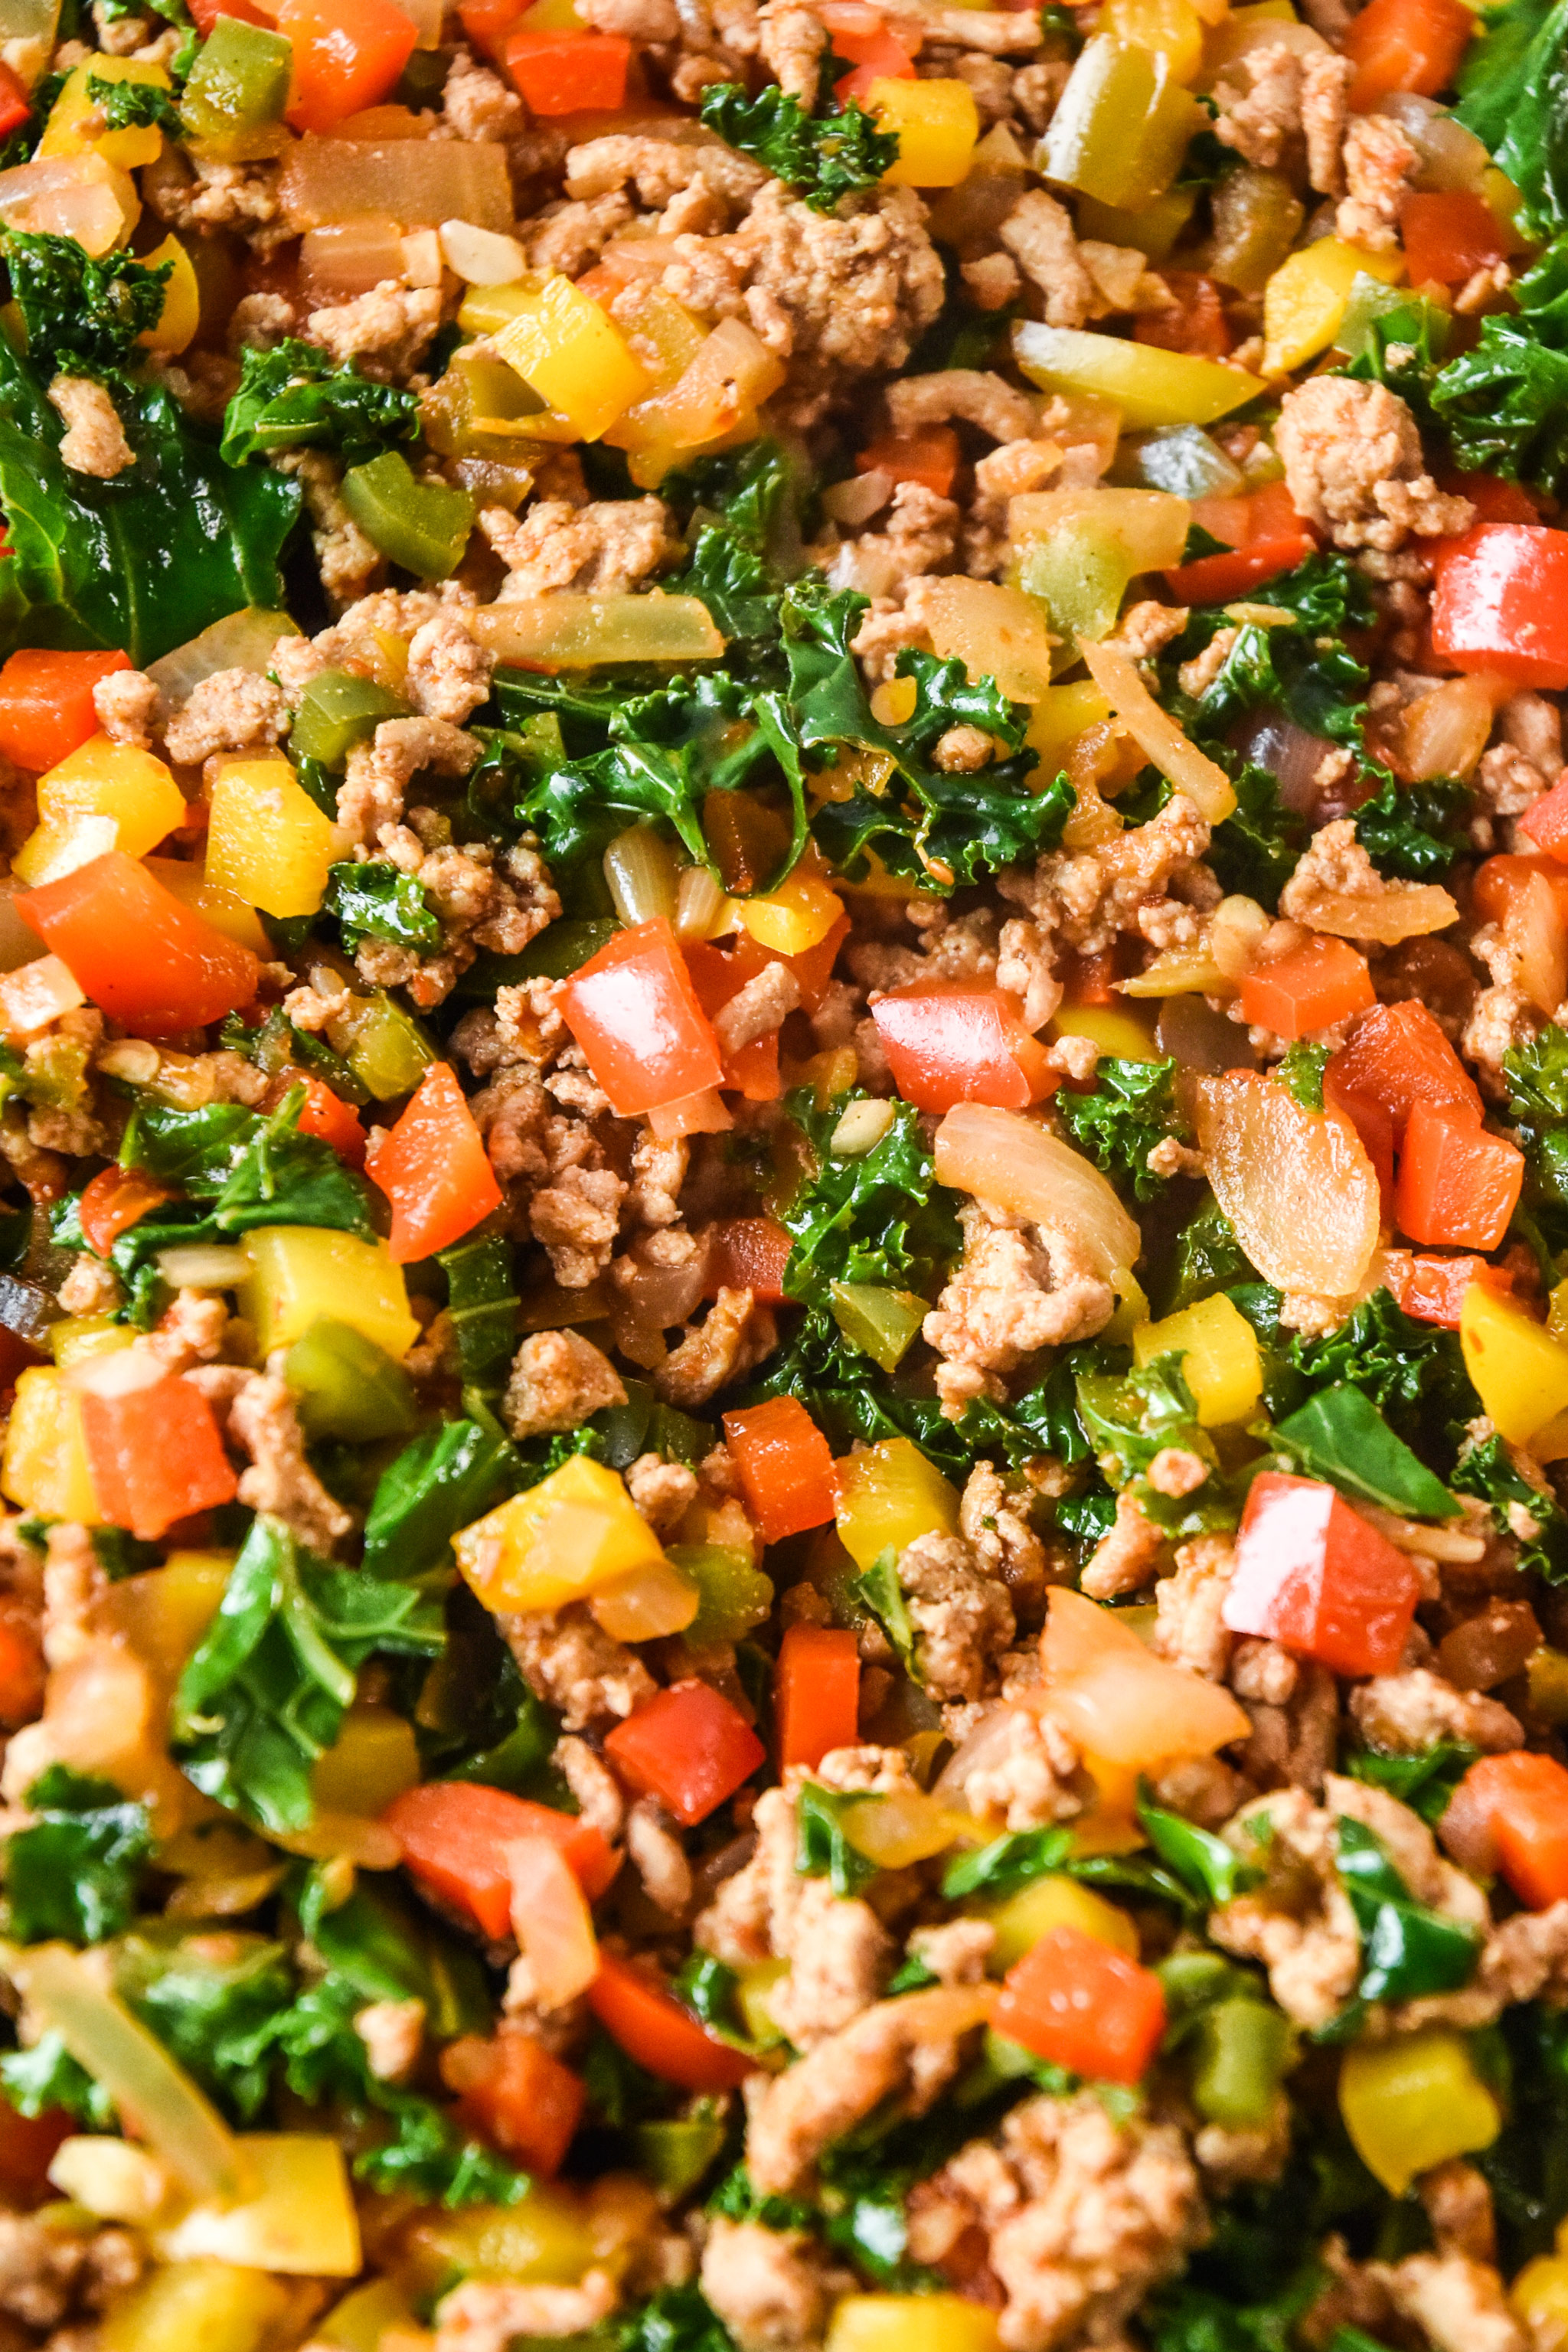 zoomed in view of the chipotle ground turkey skillet mixture